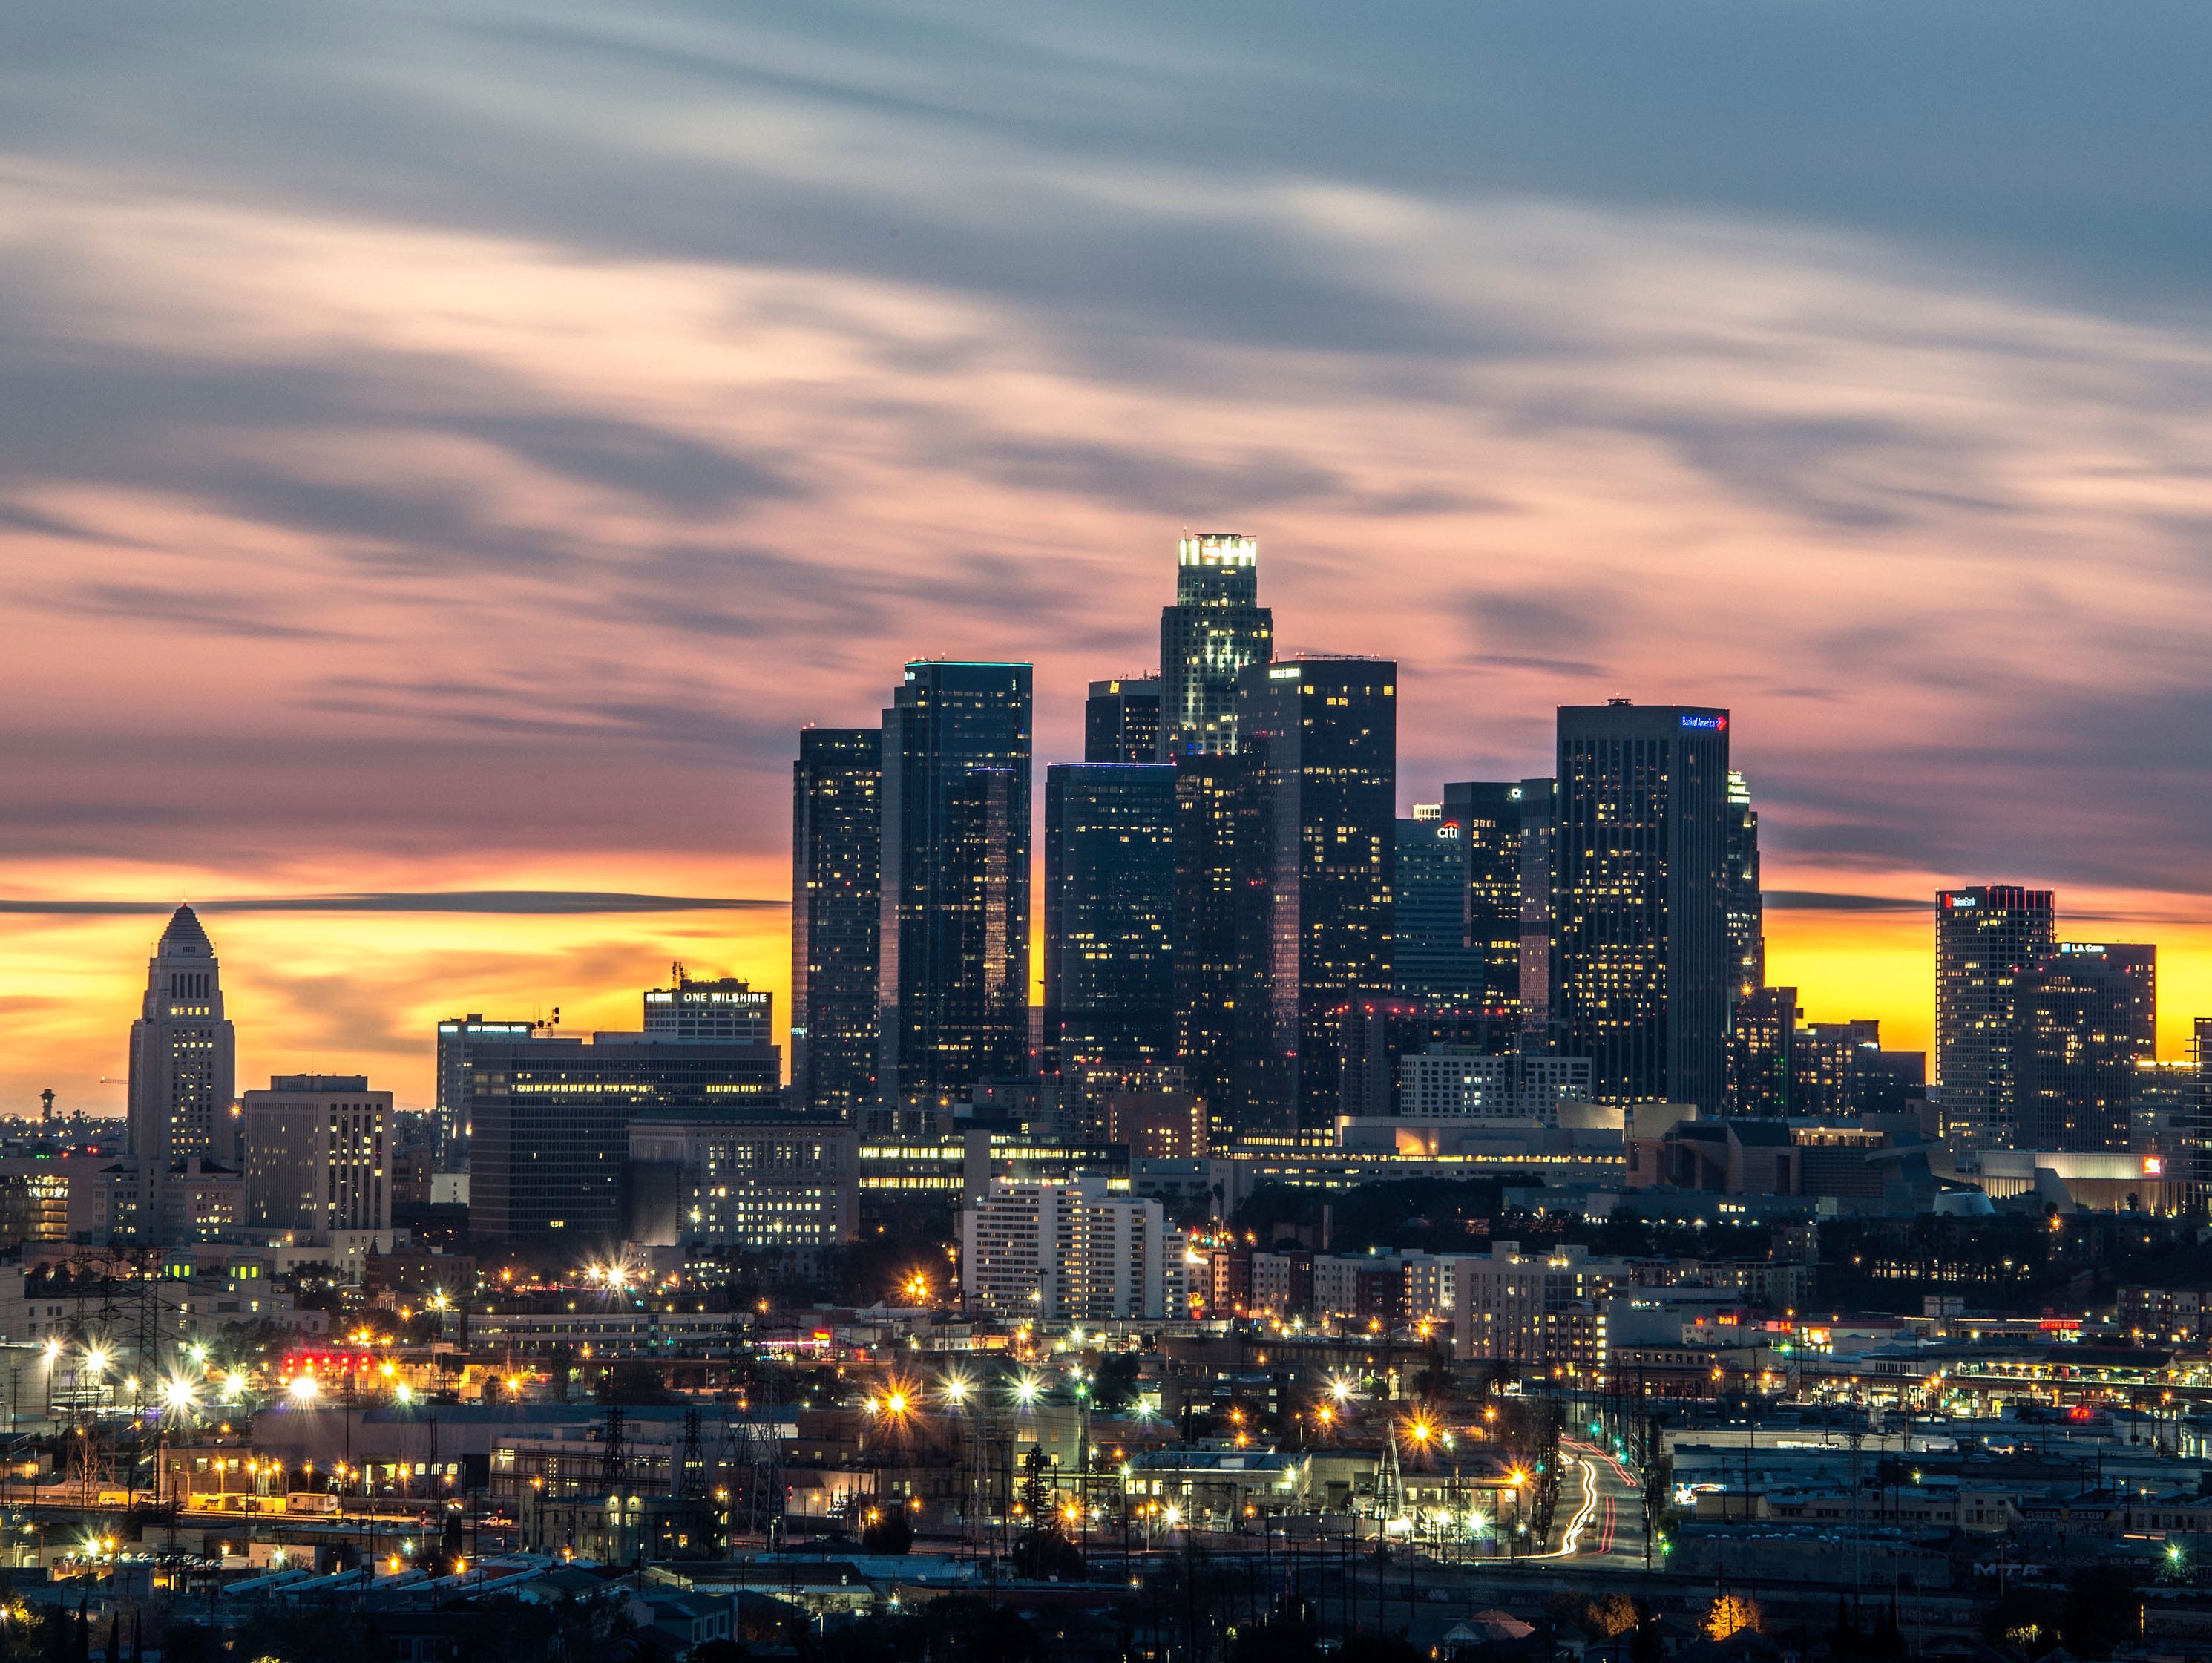 General view of the downtown Los Angeles skyline.